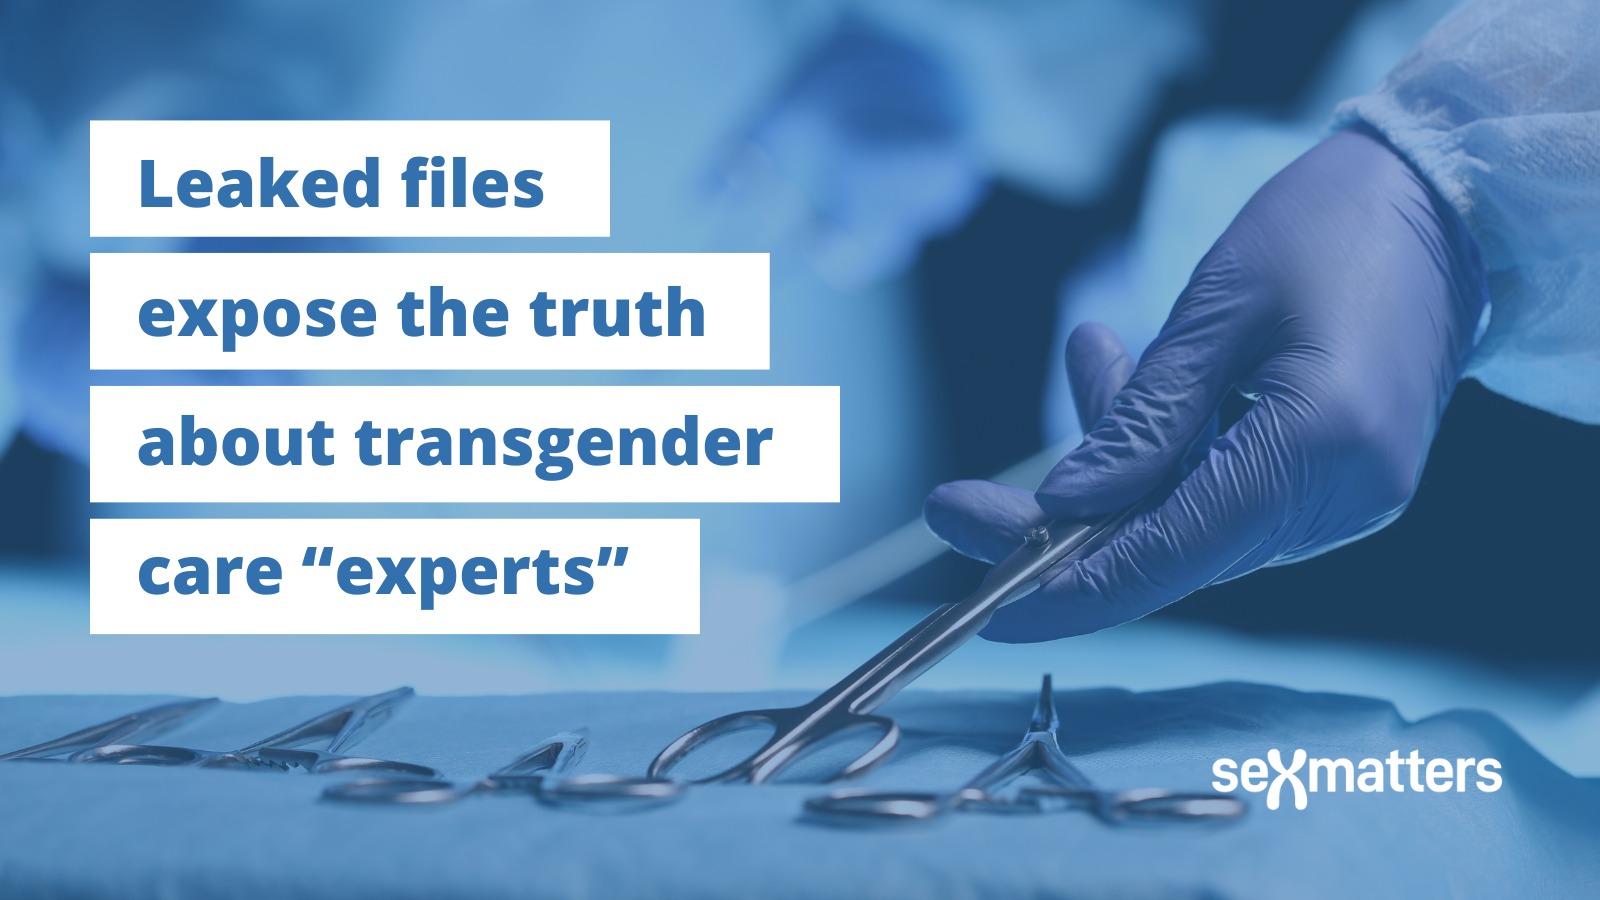 Leaked files expose the truth about transgender care “experts”